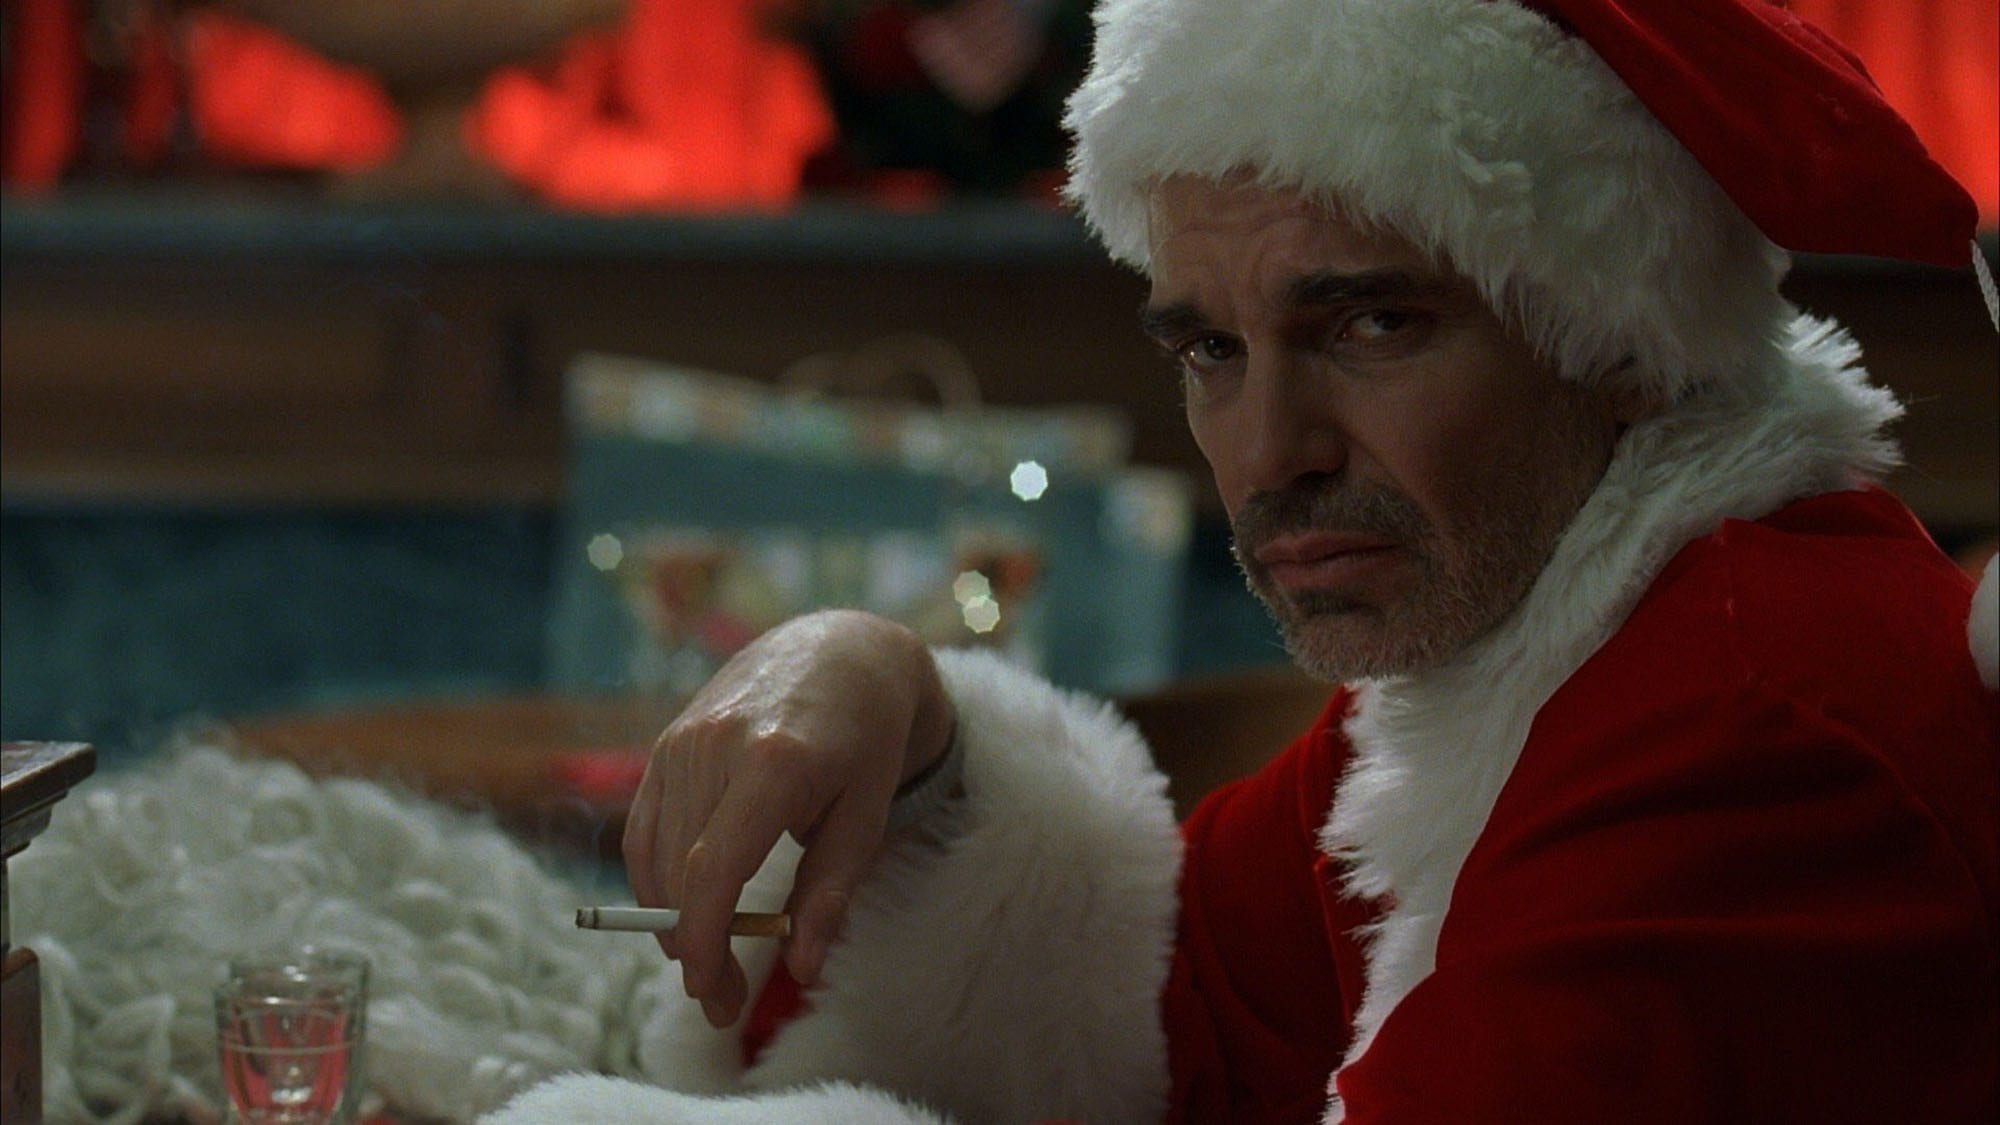 Sick of Christmas already? Then let’s cure that holiday overdose with a selection of the best anti-Xmas movies, from ‘Bad Santa’ to ‘Scrooged’.